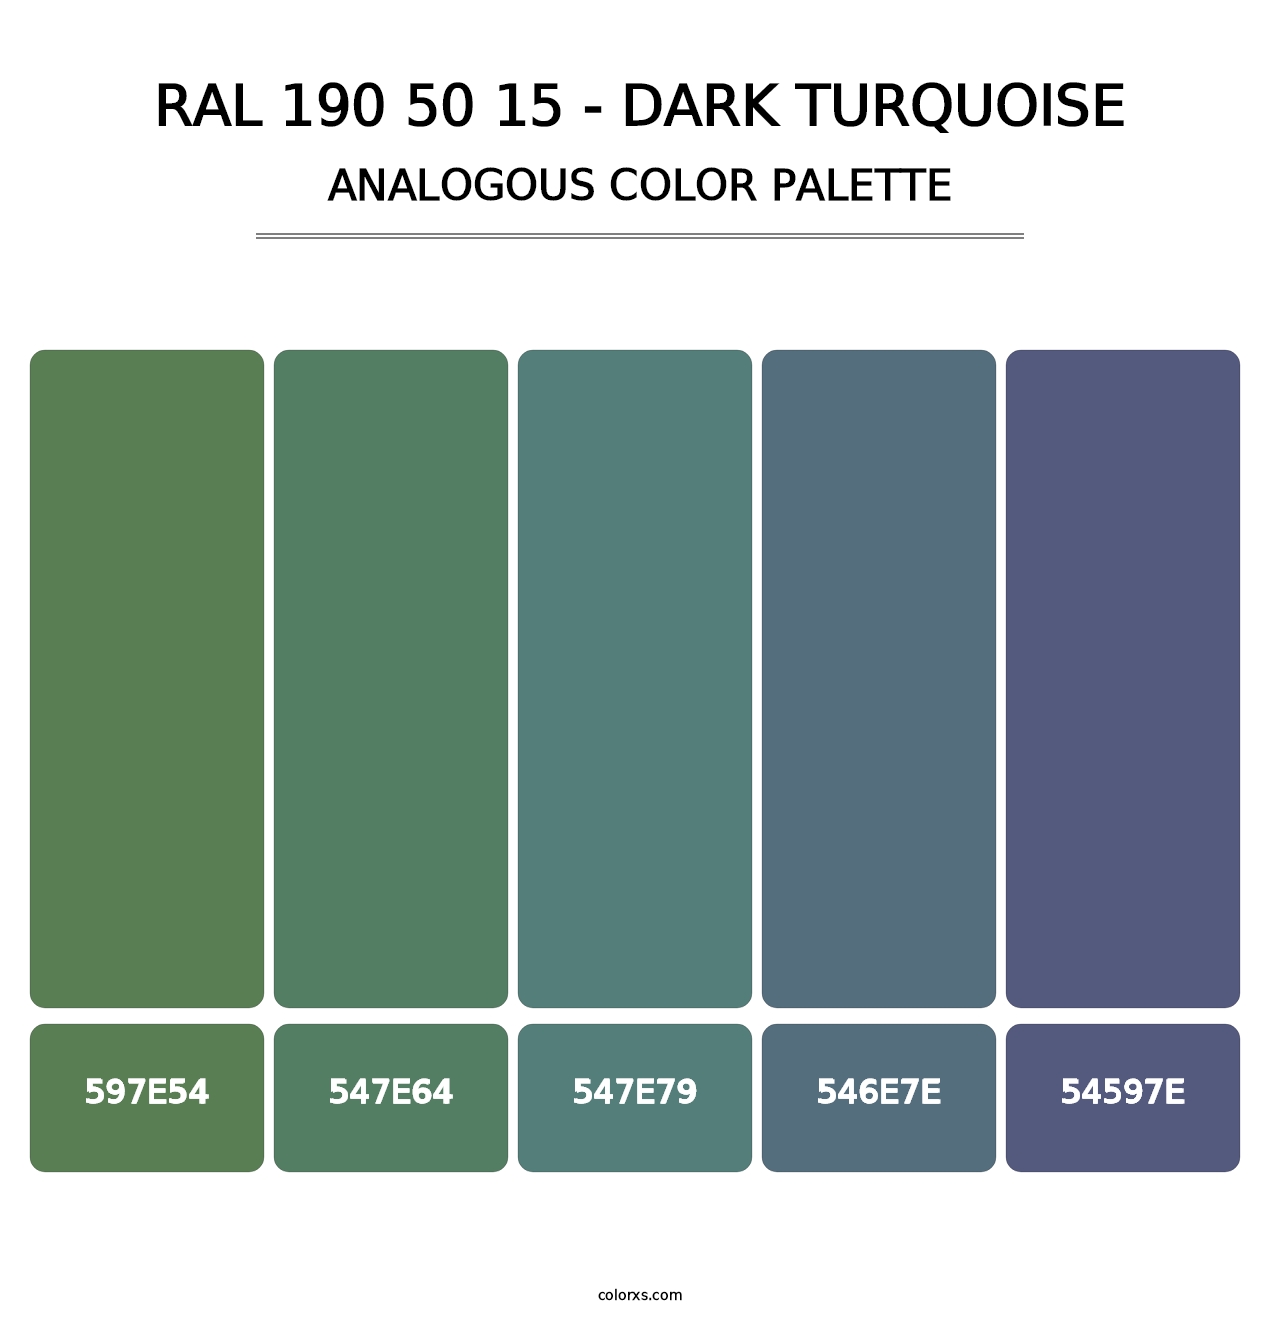 RAL 190 50 15 - Dark Turquoise - Analogous Color Palette